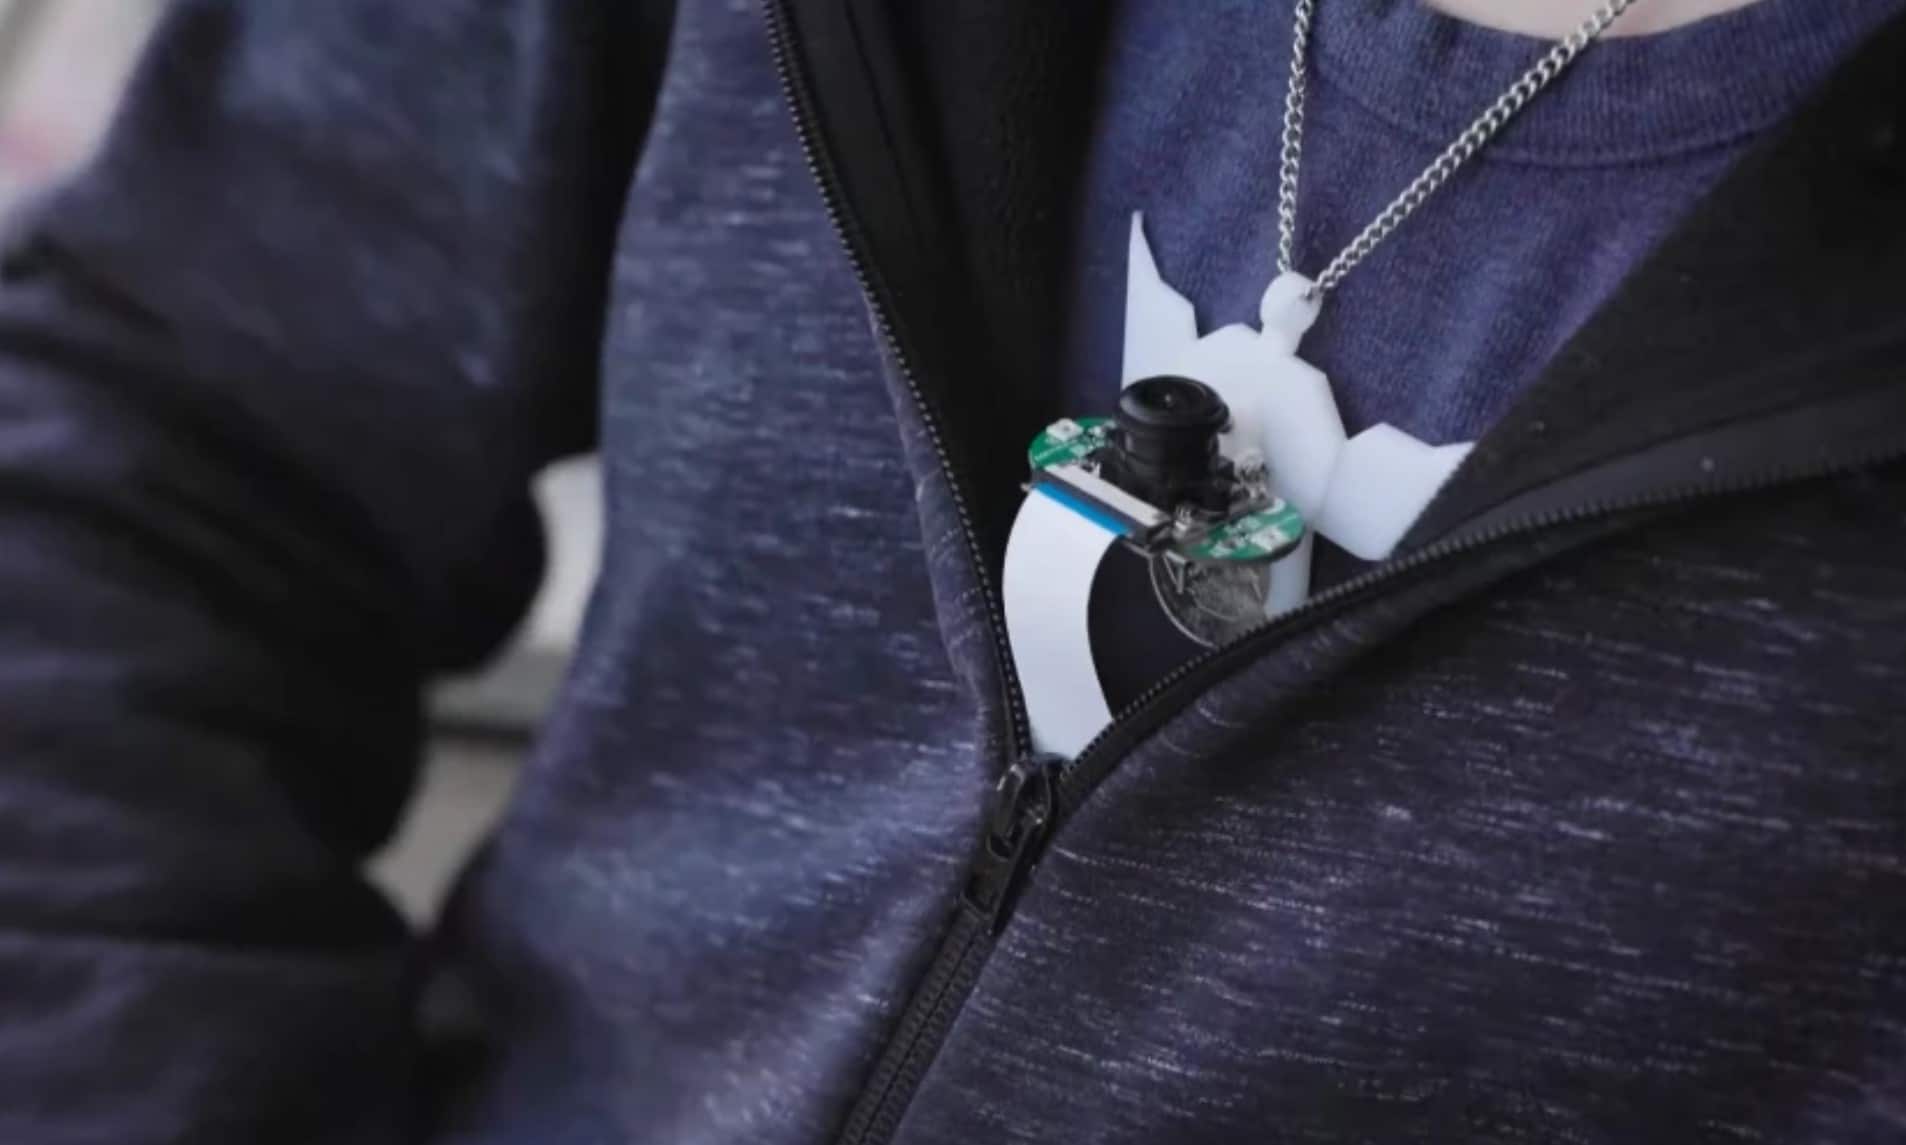 This is Speechin, a necklace camera that recognizes silent commands